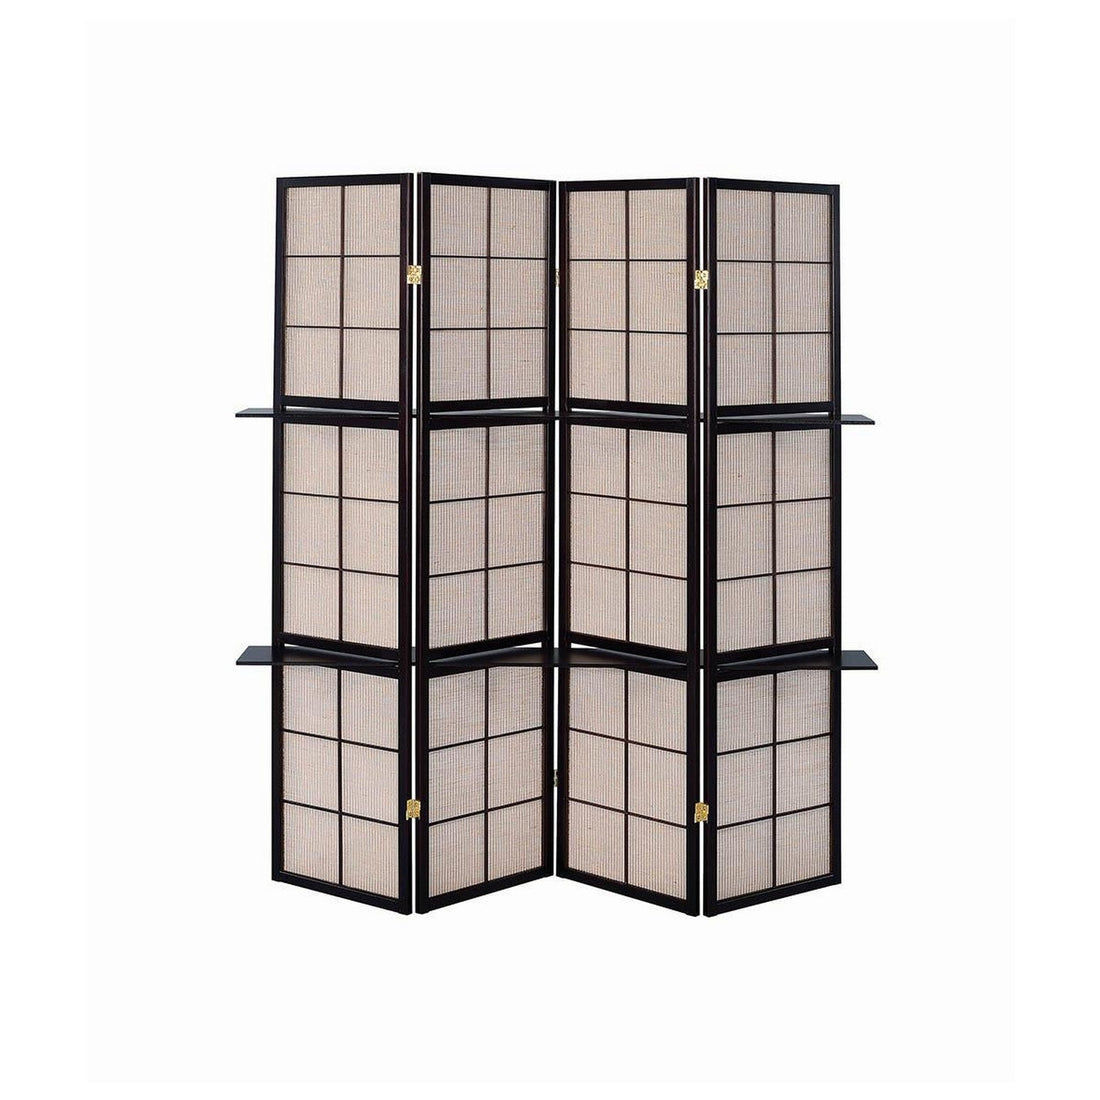 Iggy 4-panel Folding Screen with Removable Shelves Tan and Cappuccino 900166